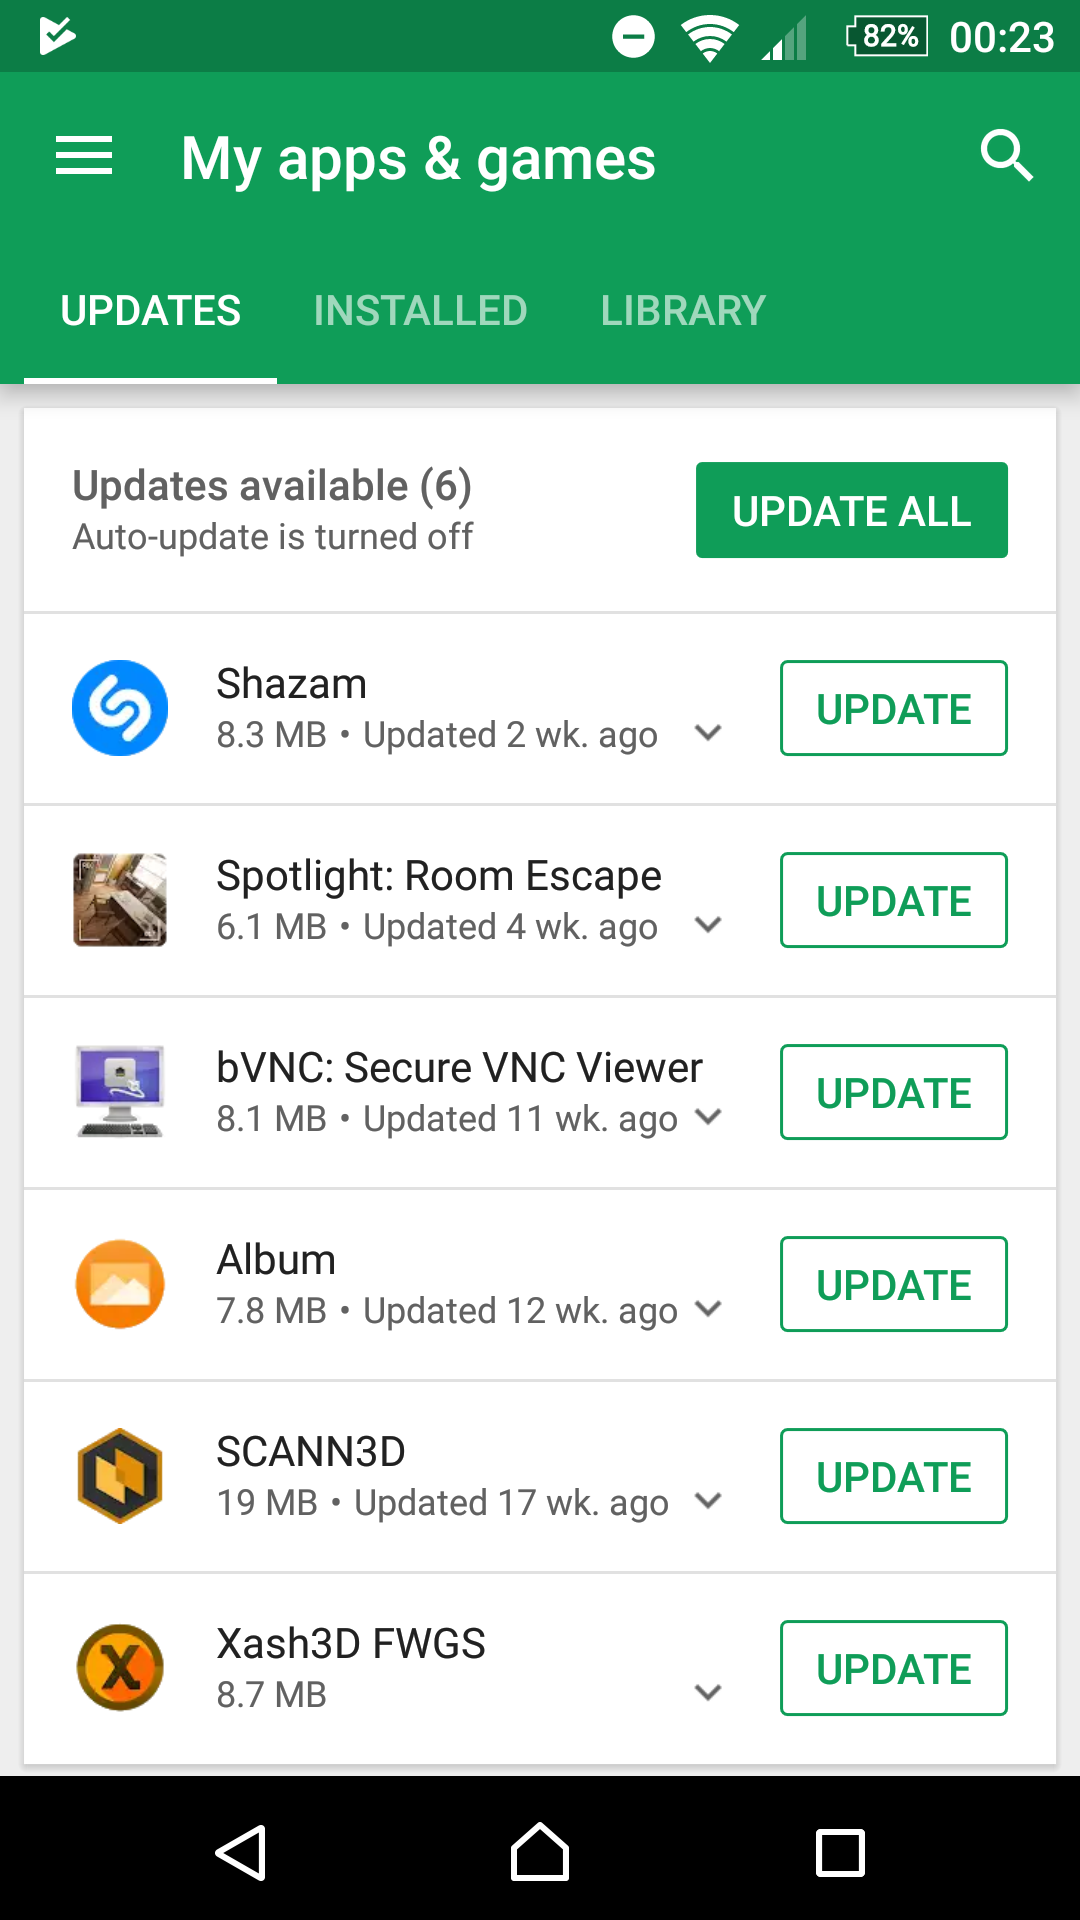 45 Top Pictures Google Suite App Store - Google Play Store app update to bring batch app install ...